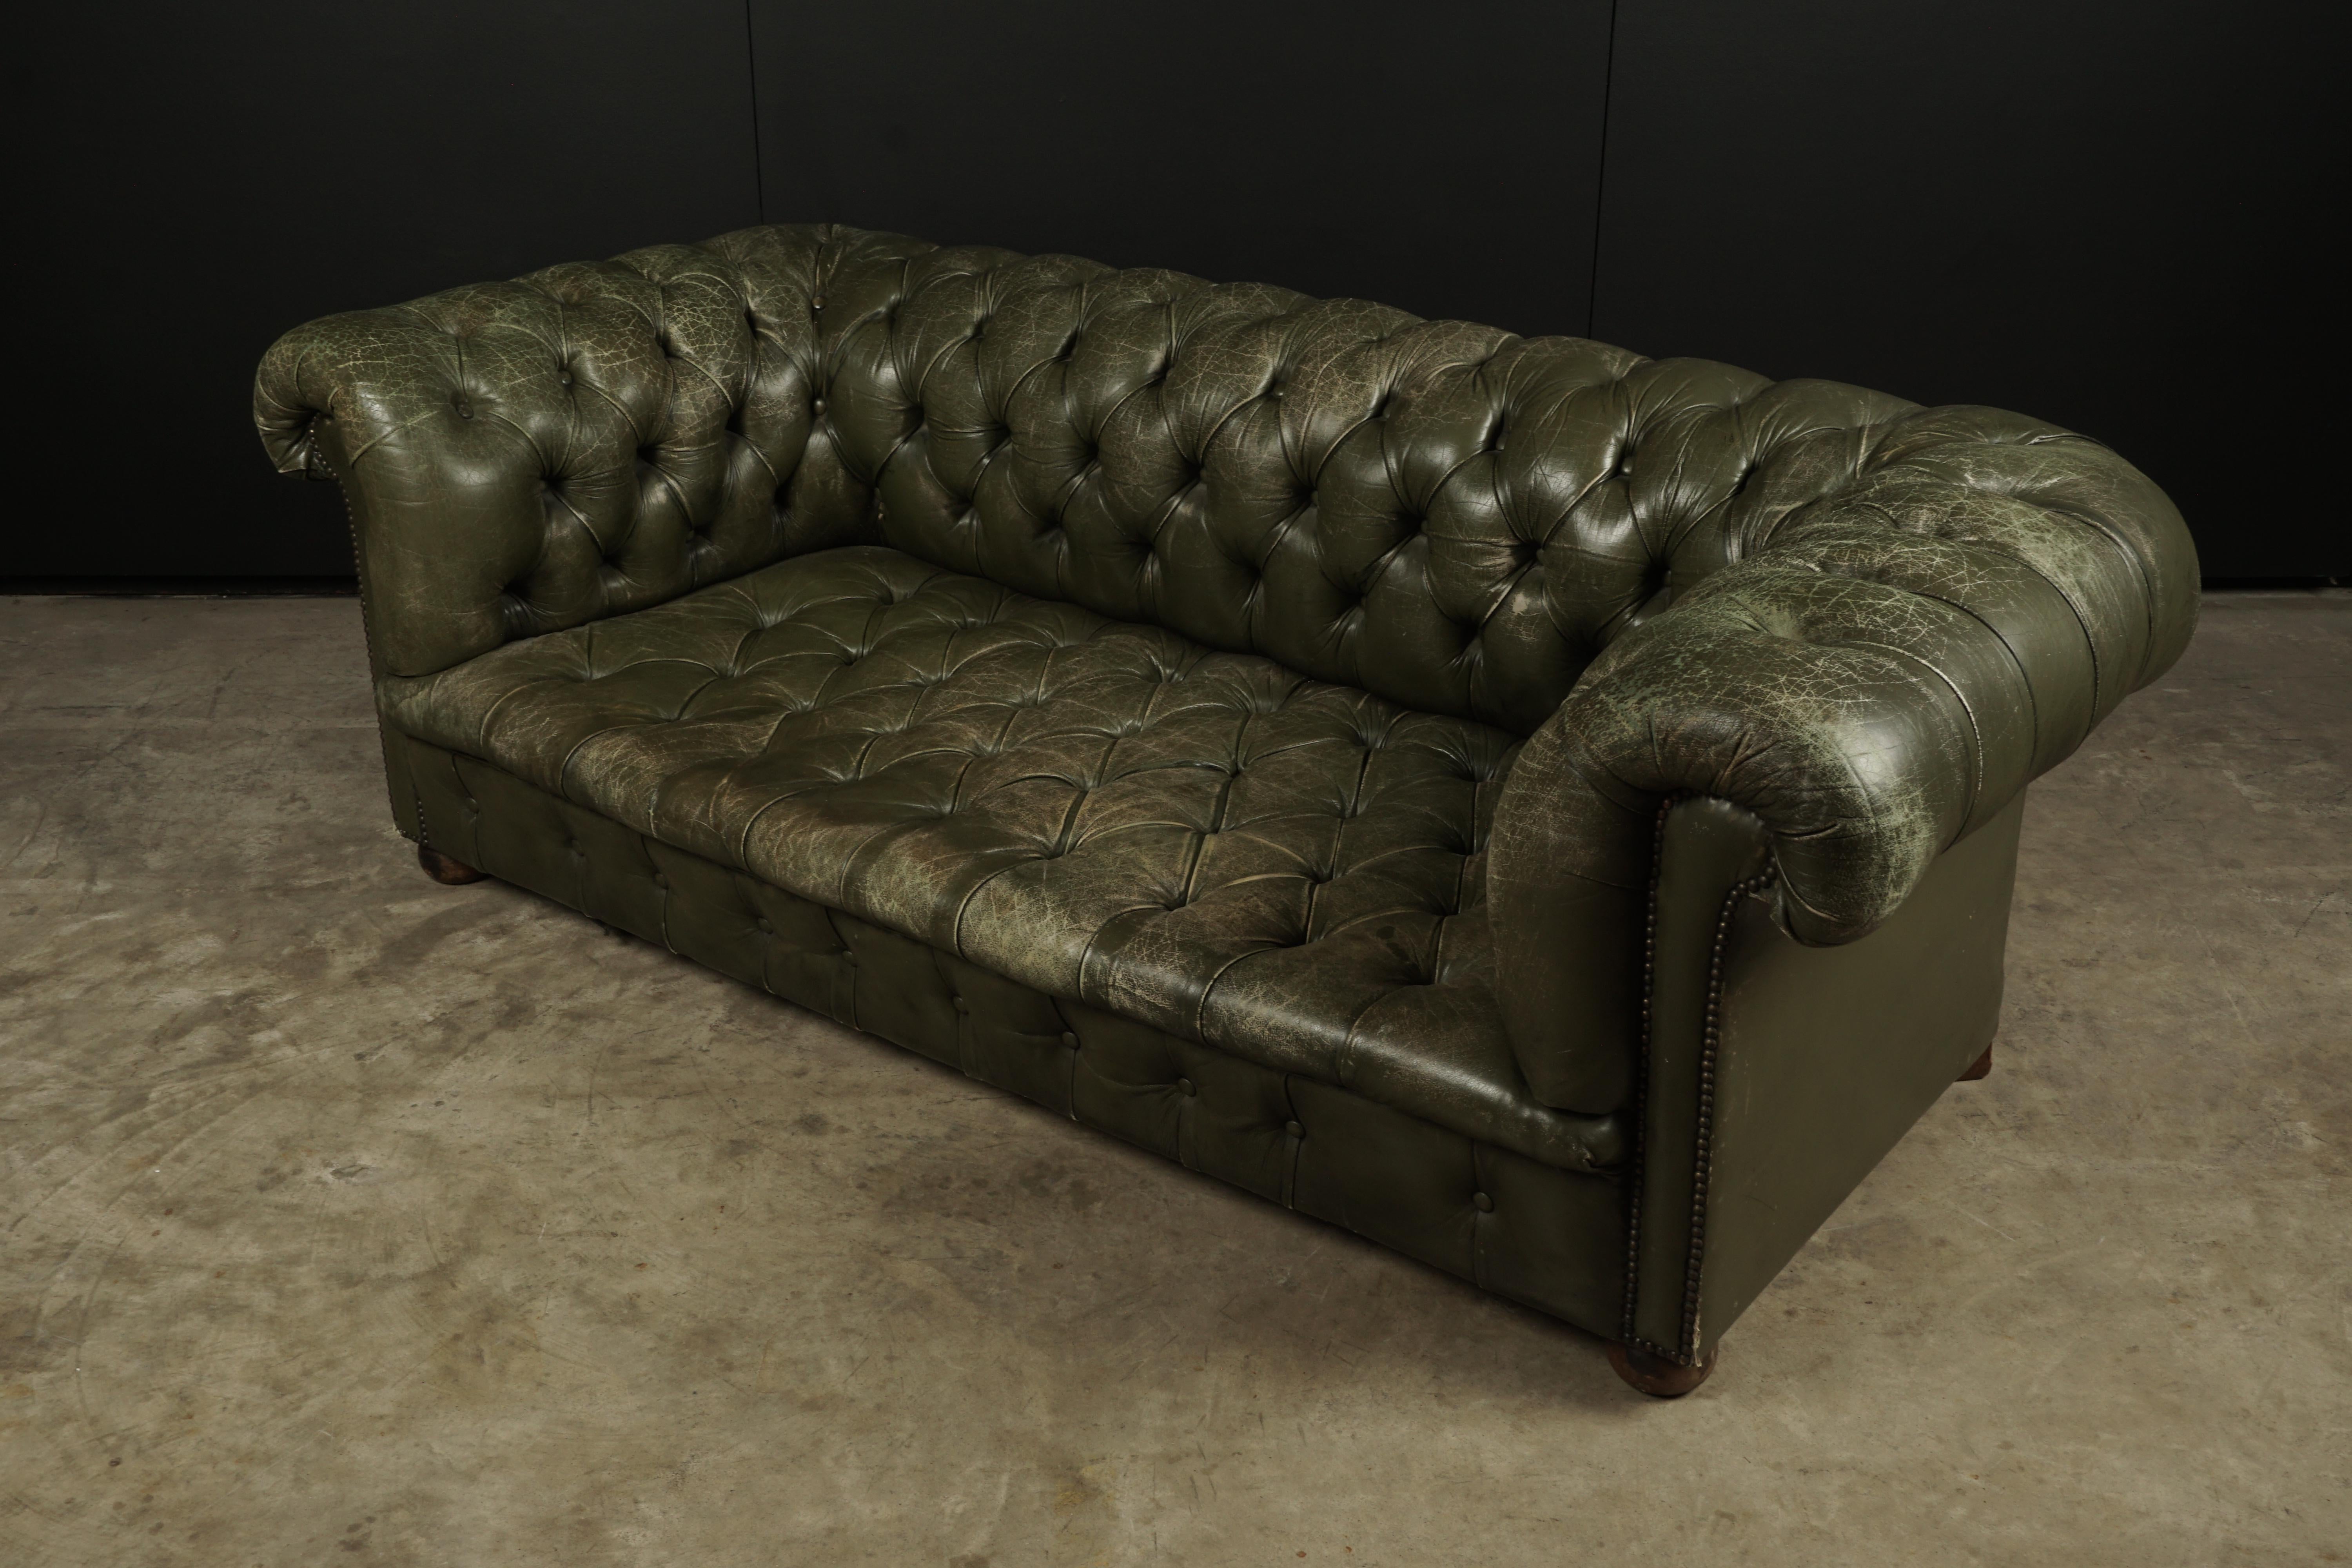 Vintage leather Chesterfield sofa from England, circa 1960. Original green leather upholstery with fantastic patina and wear.